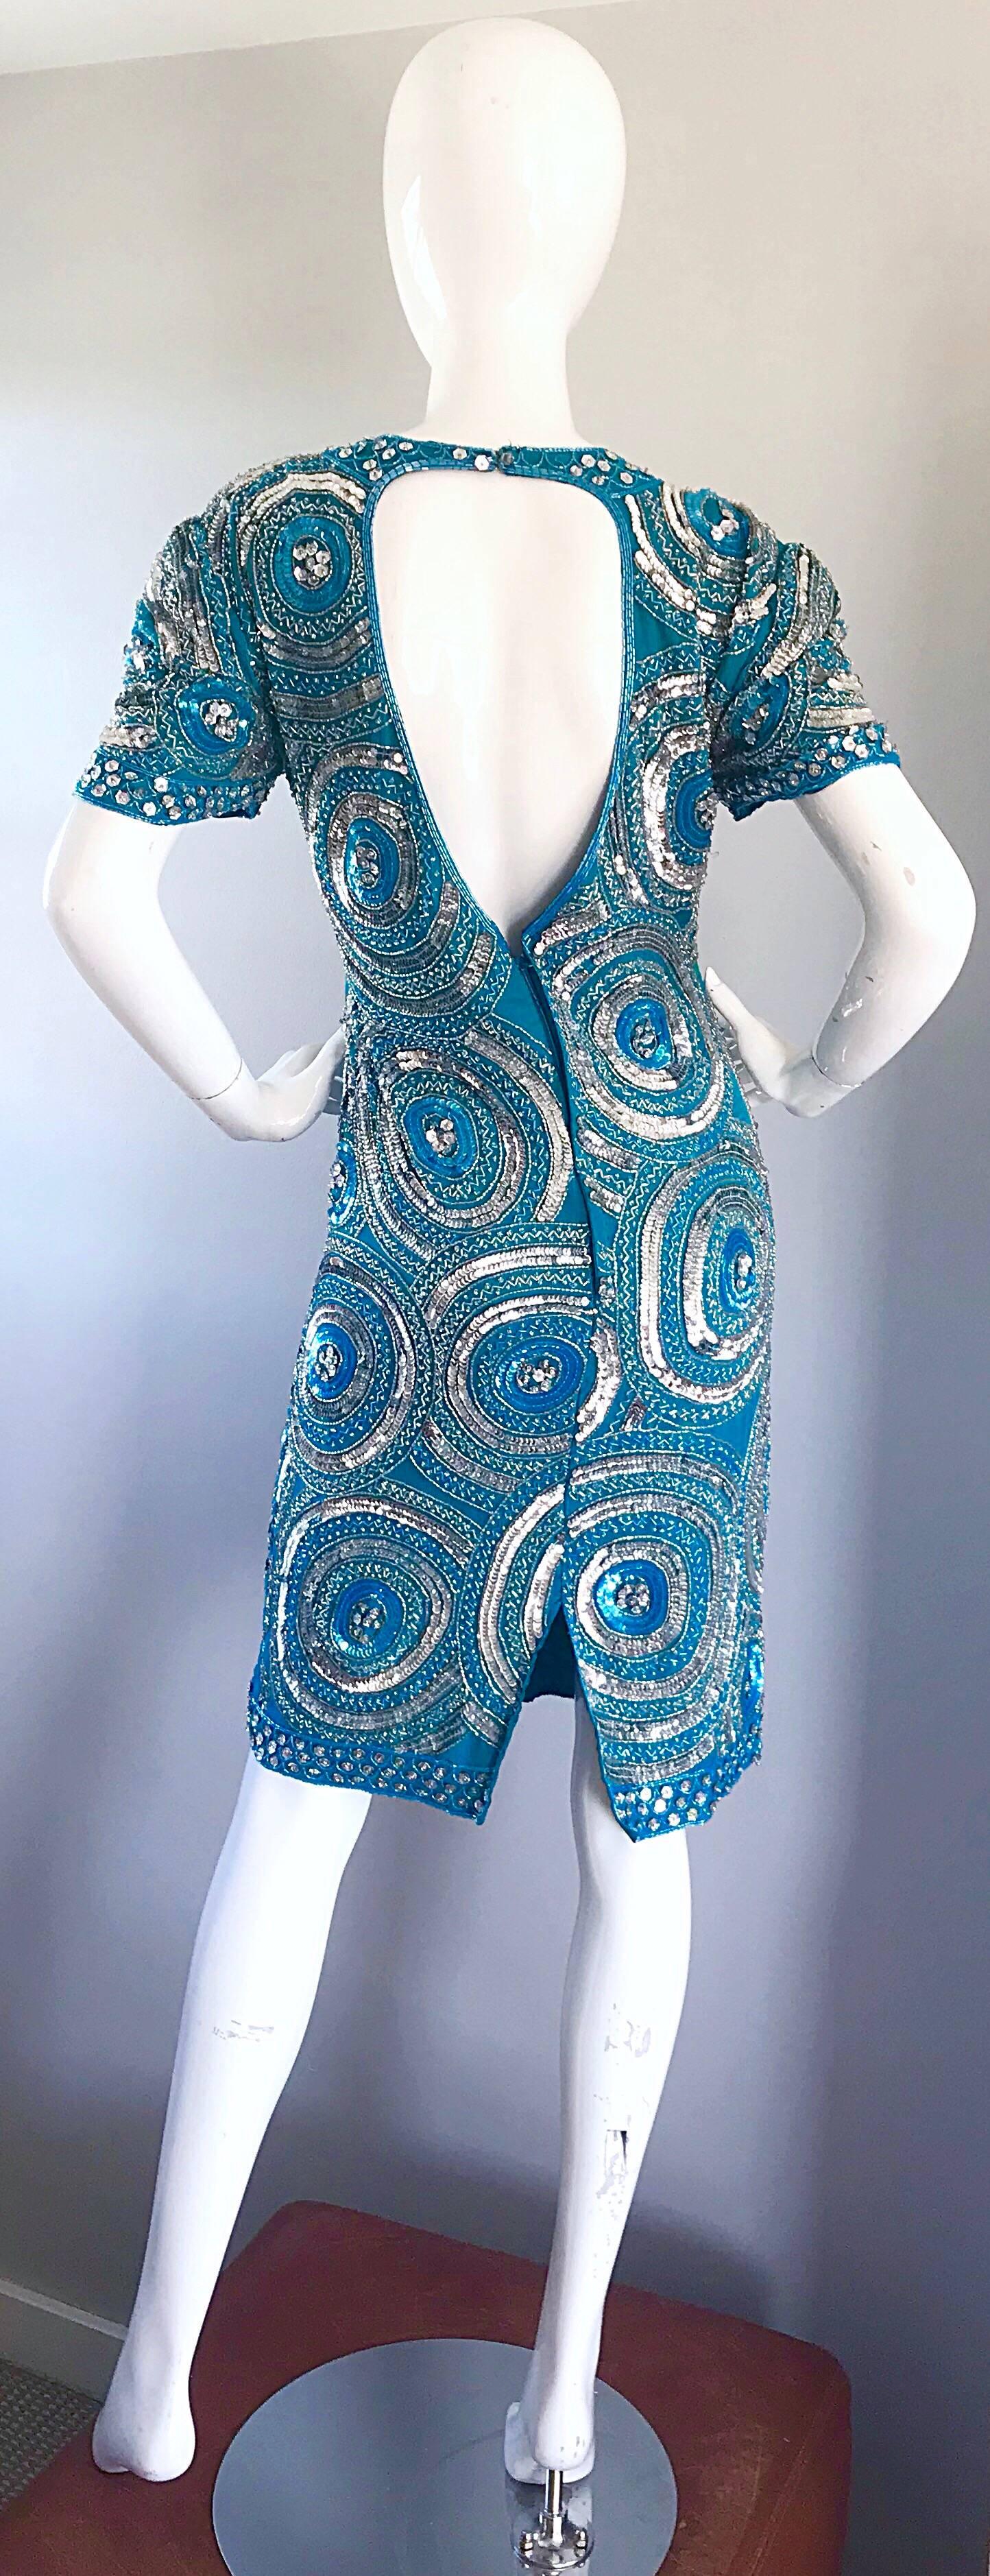 Gorgeous larger size vintage turquoise blue and silver fully sequined open back silk cocktail dress! Features thousands of hand-sewn silver and turquoise blue sequins and beads throughout. Circular patterns. Flattering open back reveals just the